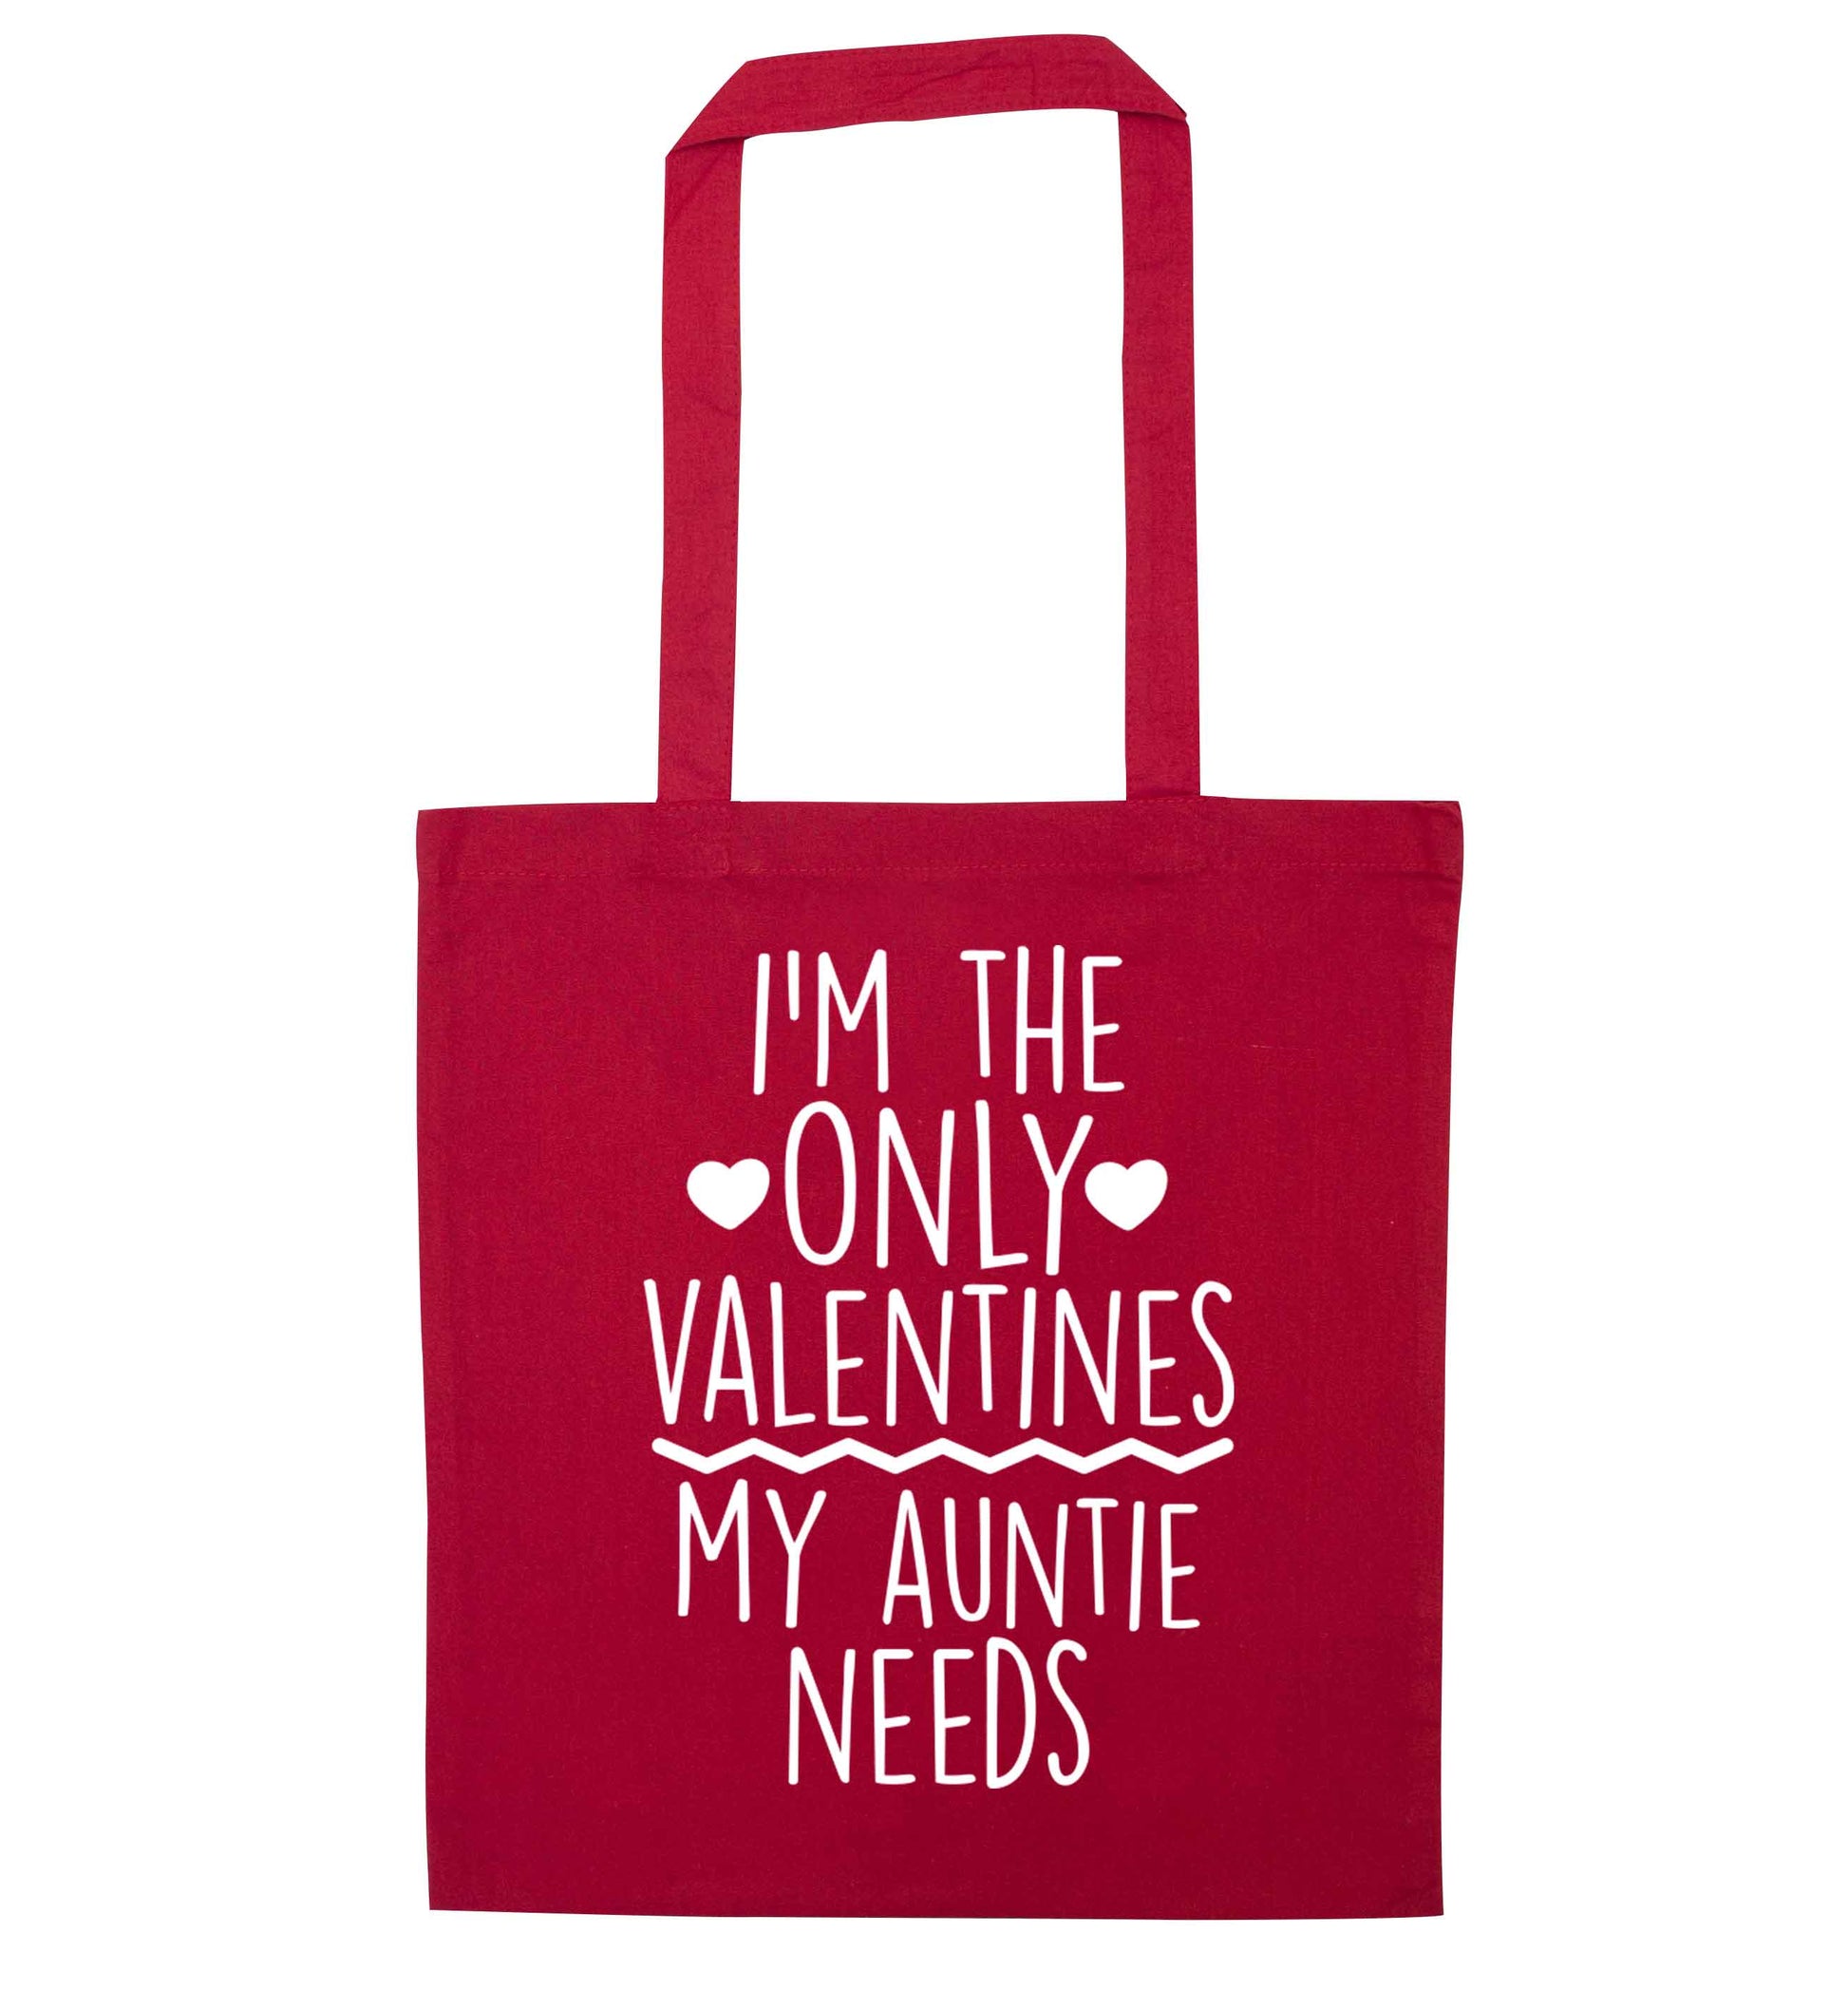 I'm the only valentines my auntie needs red tote bag